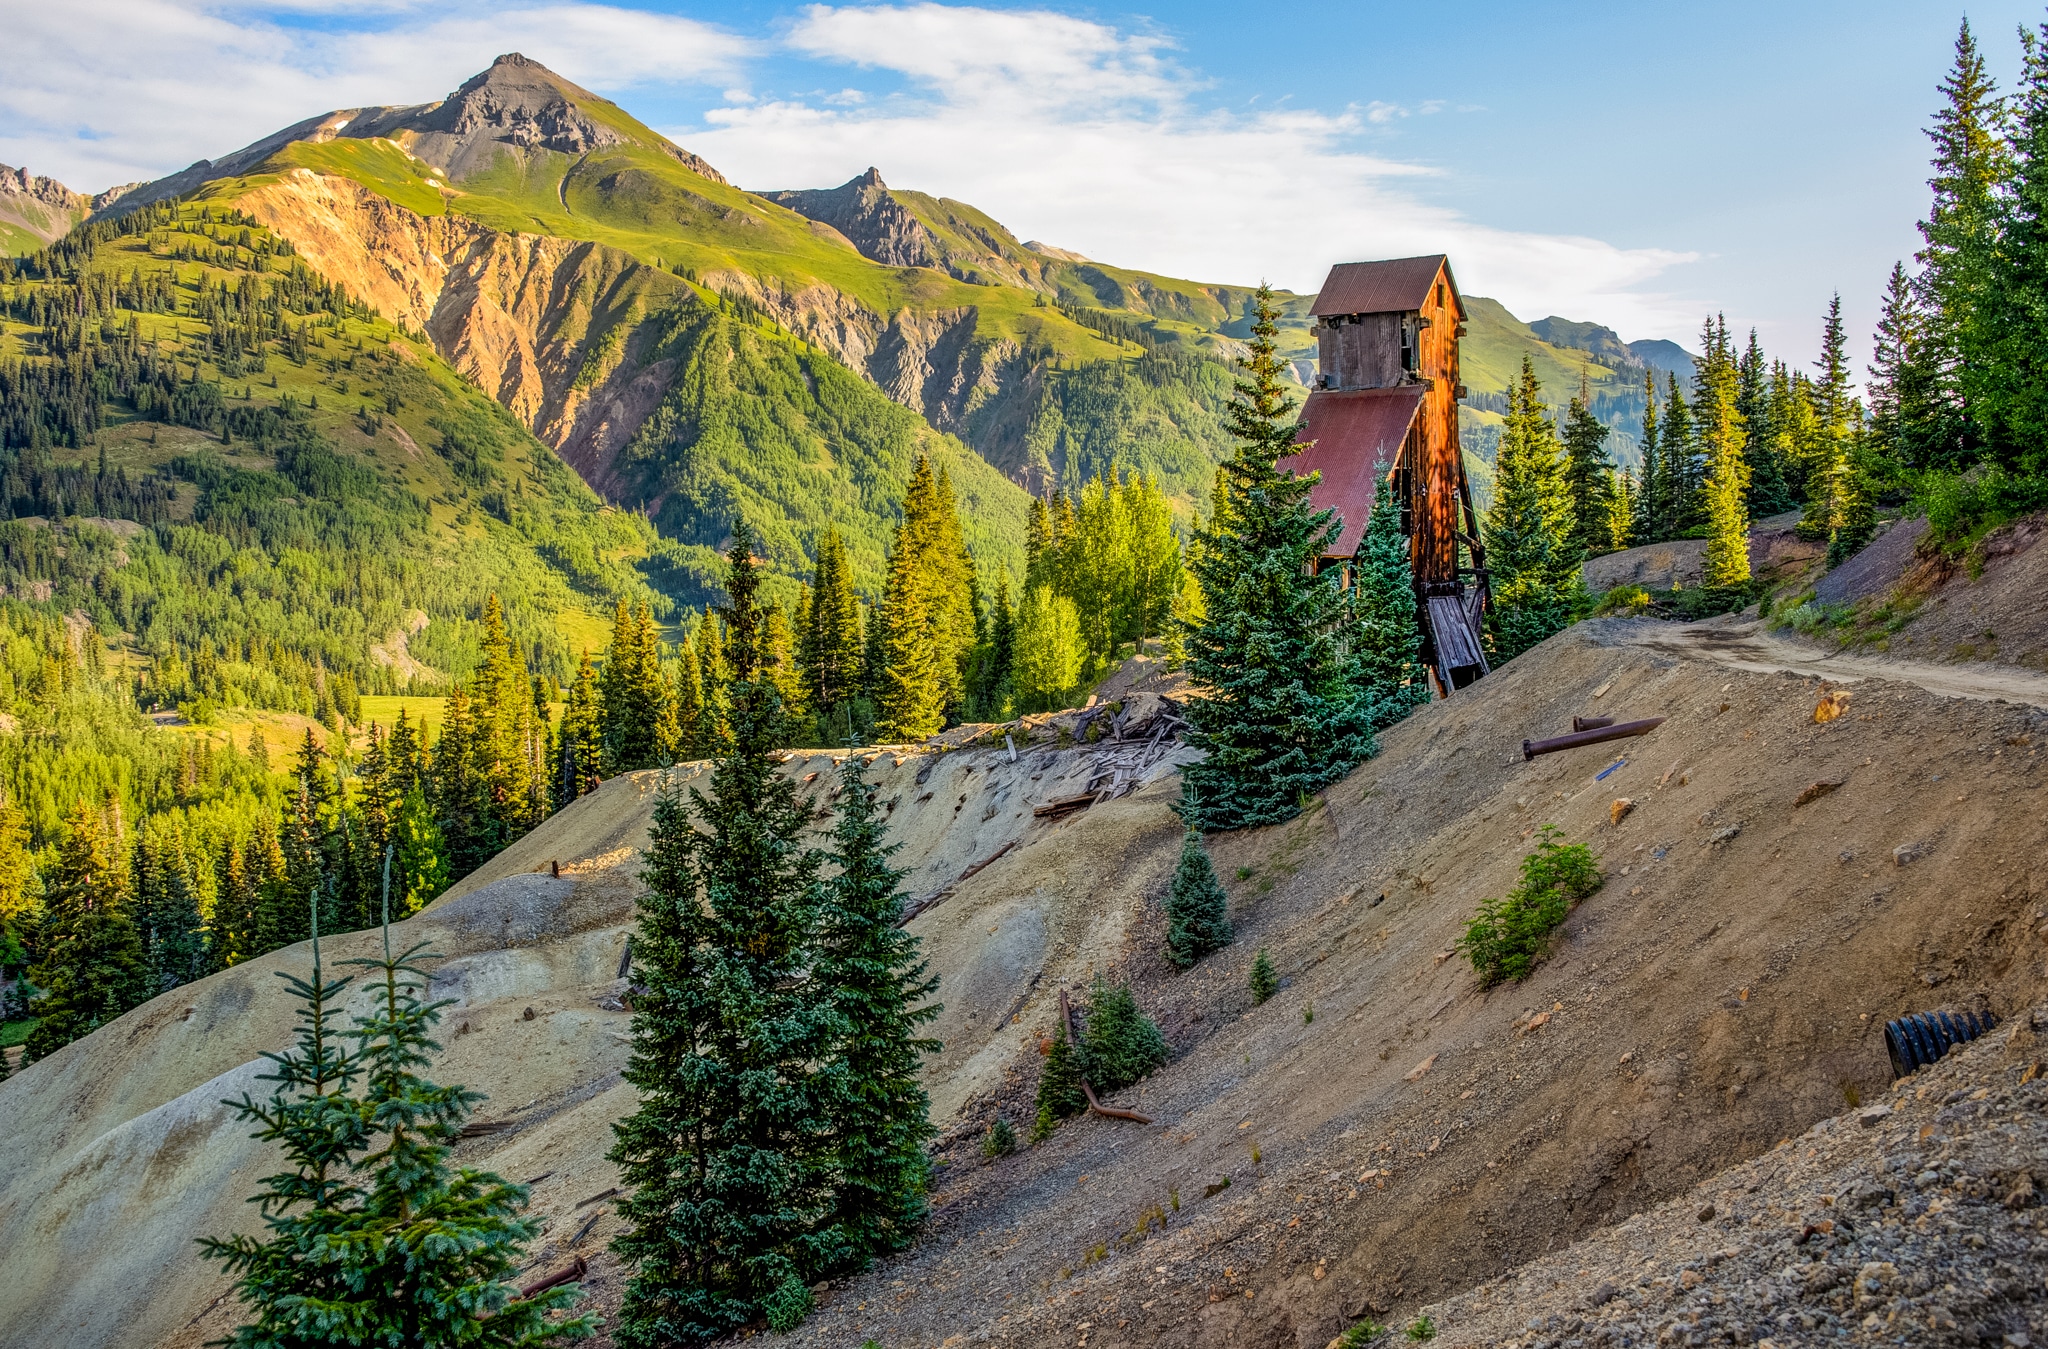 An early morning view of the Yankee Girl Mine headframe viewed from Ouray County Road 31 near Ouray, Colorado.